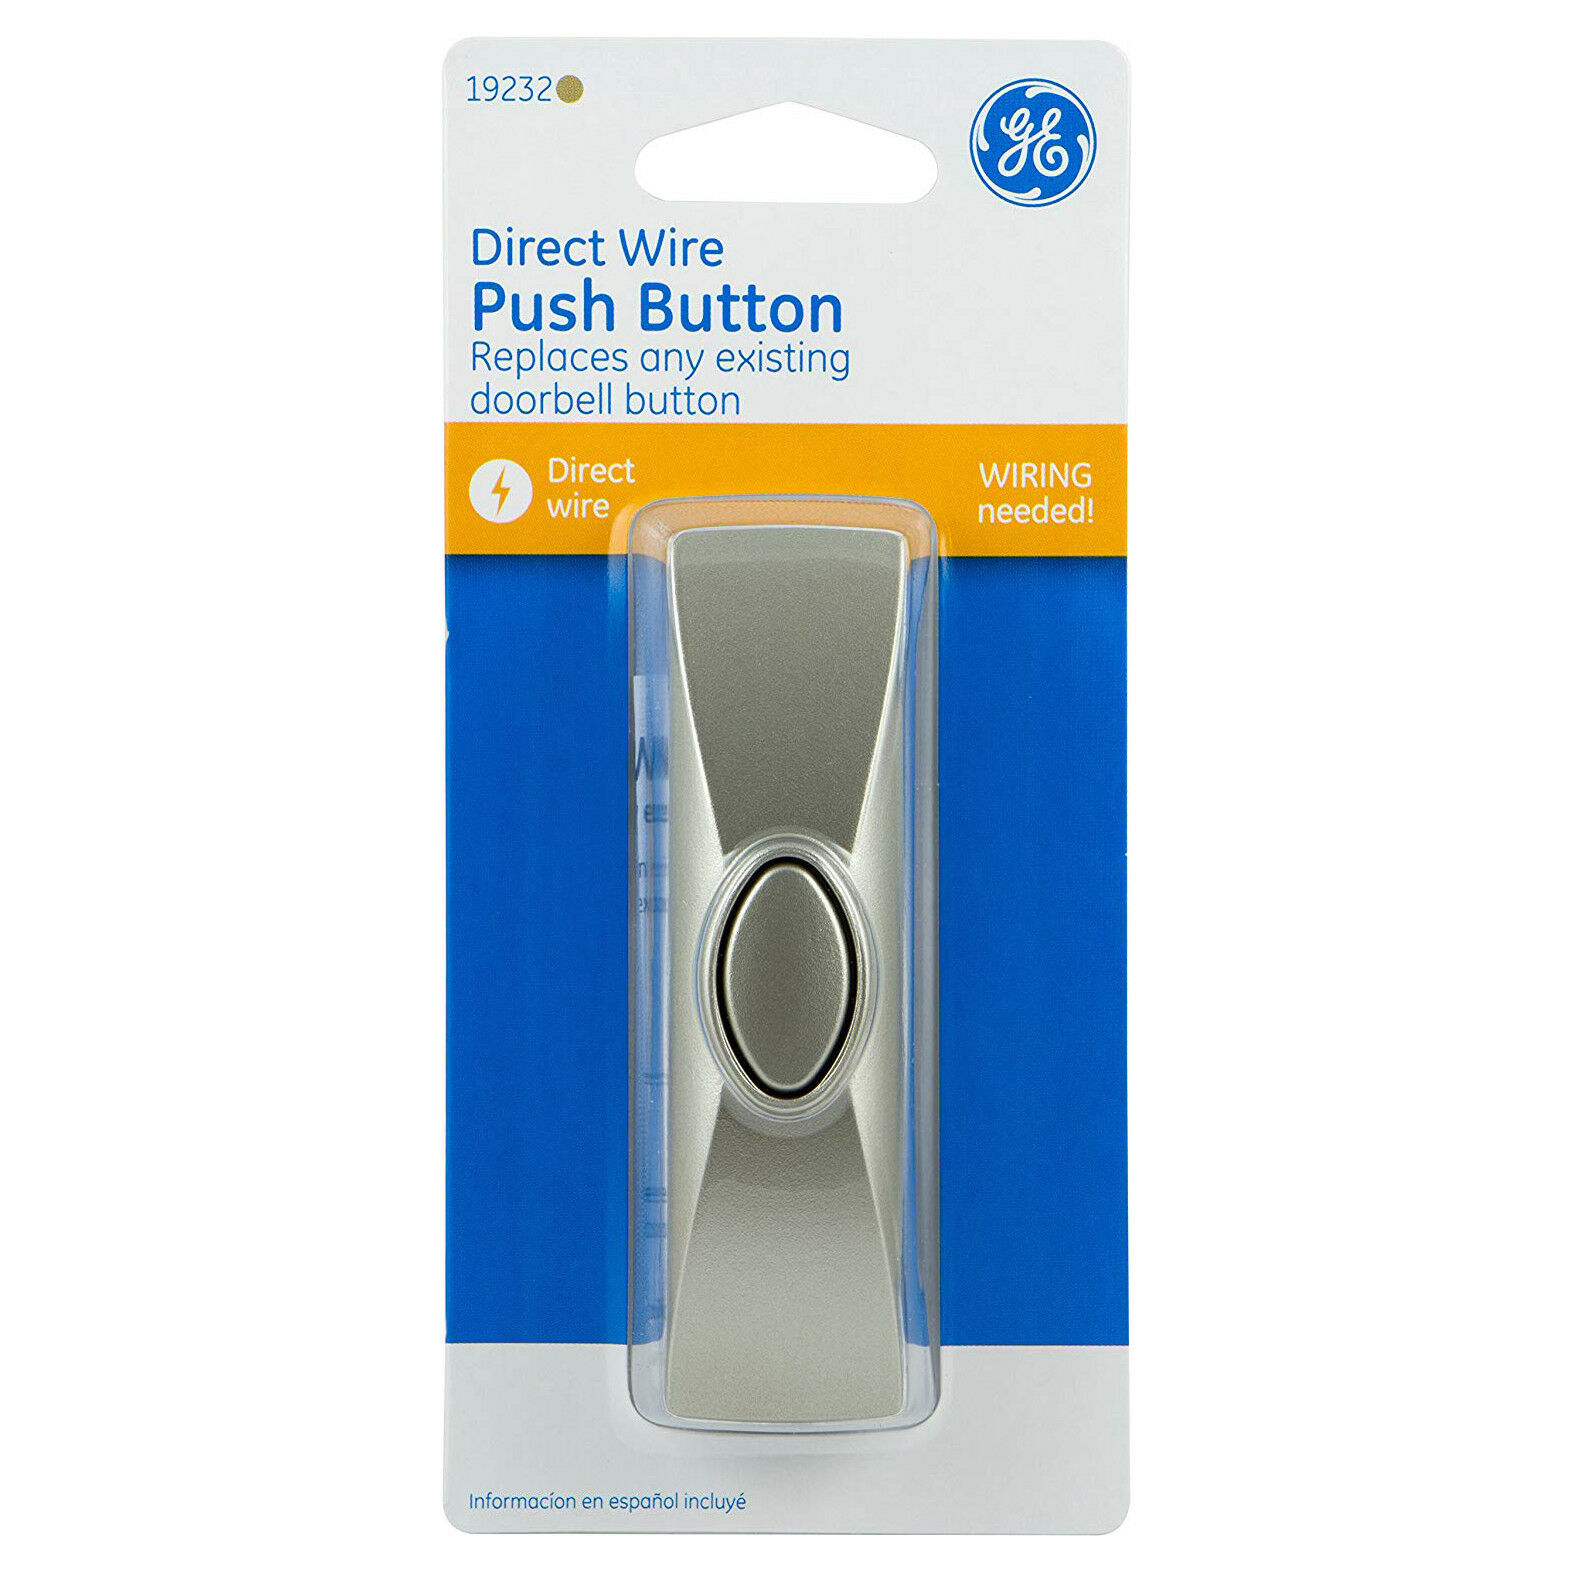 GE Direct Wire Push Button Doorbell Replacement 